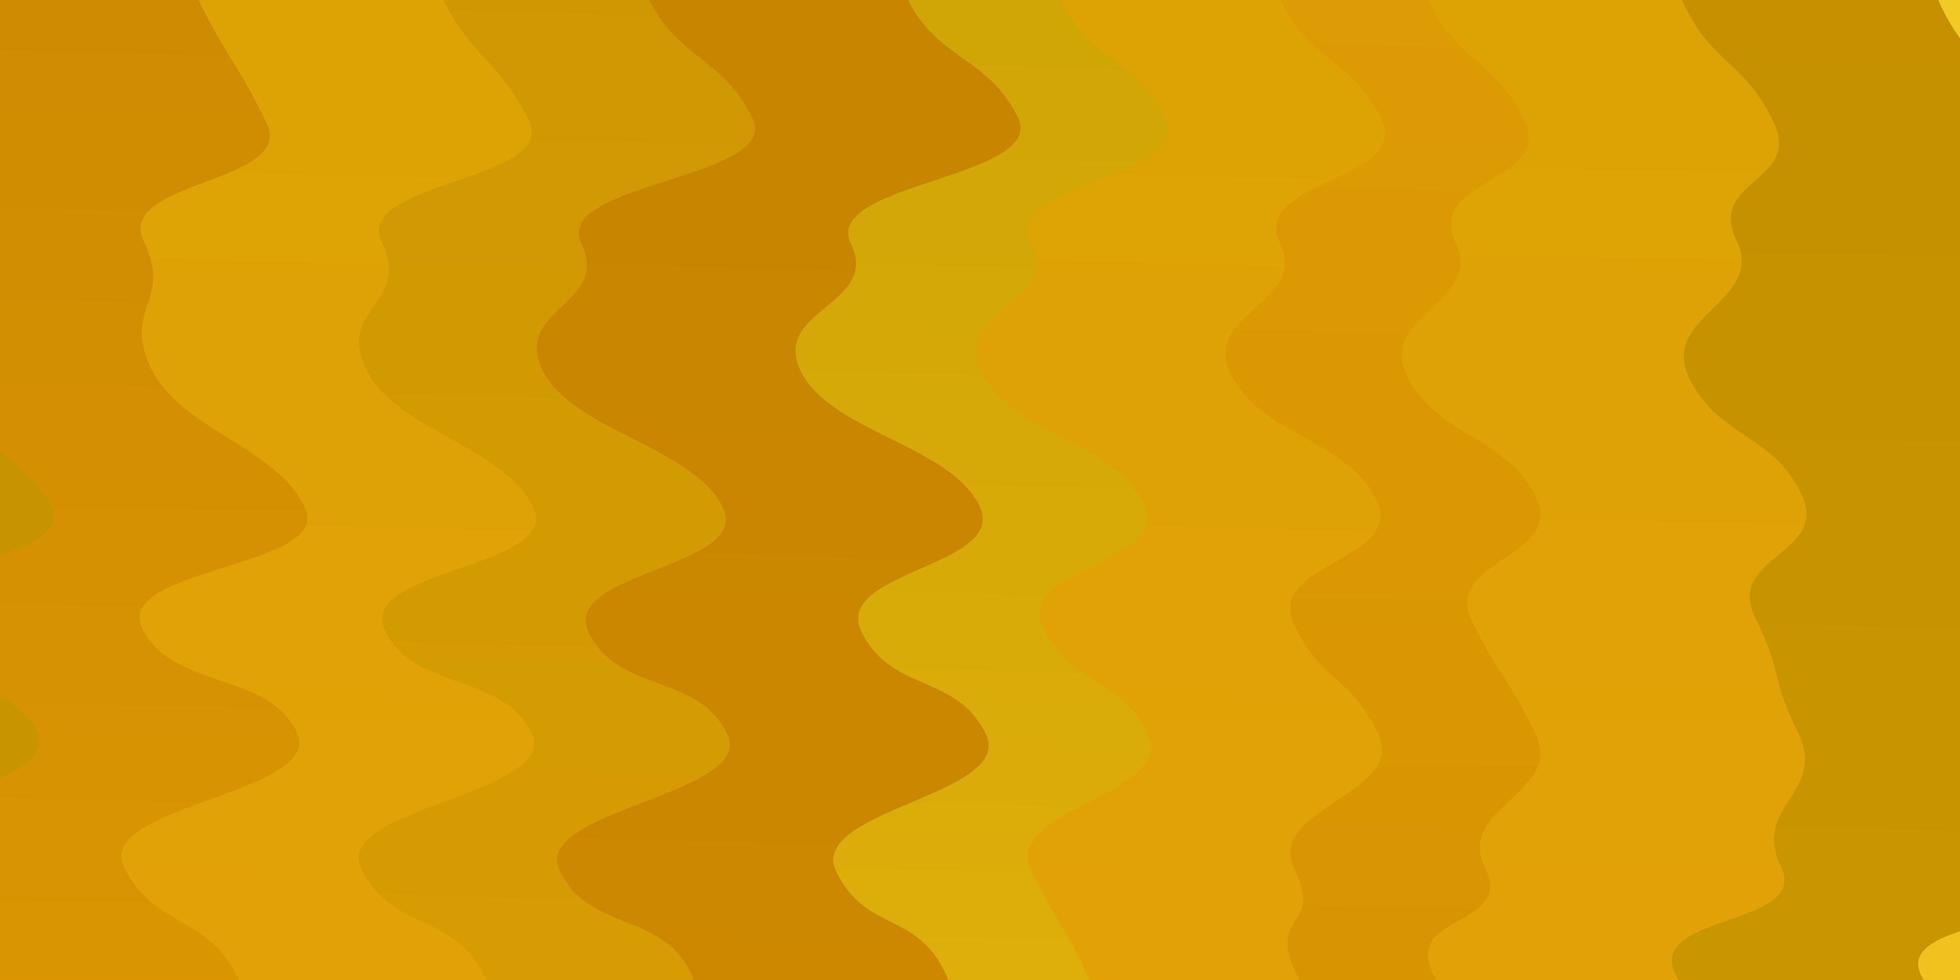 Dark Yellow vector pattern with wry lines.